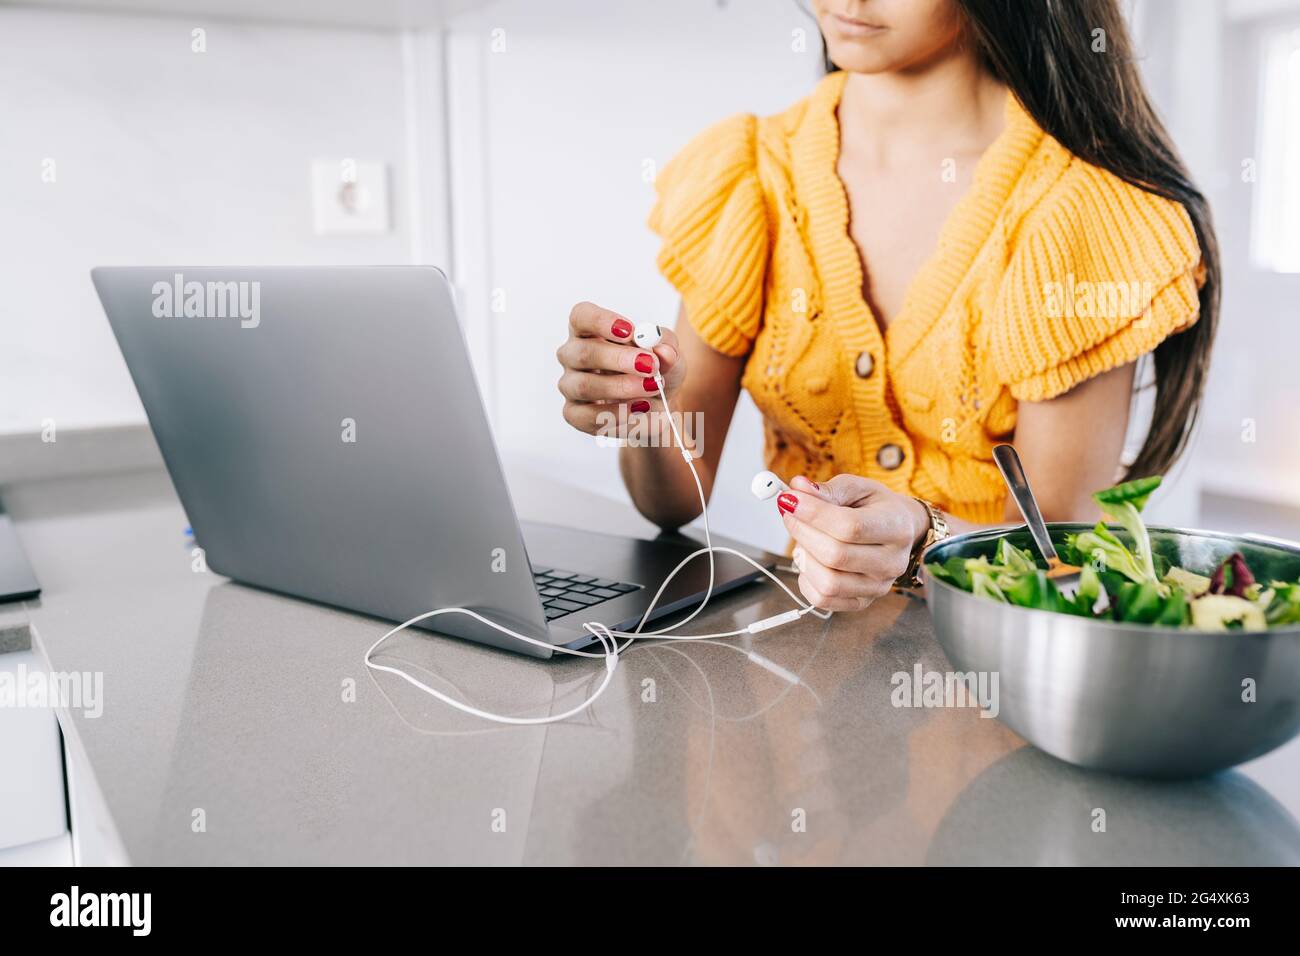 Woman holding in-ear headphones by laptop at home Stock Photo